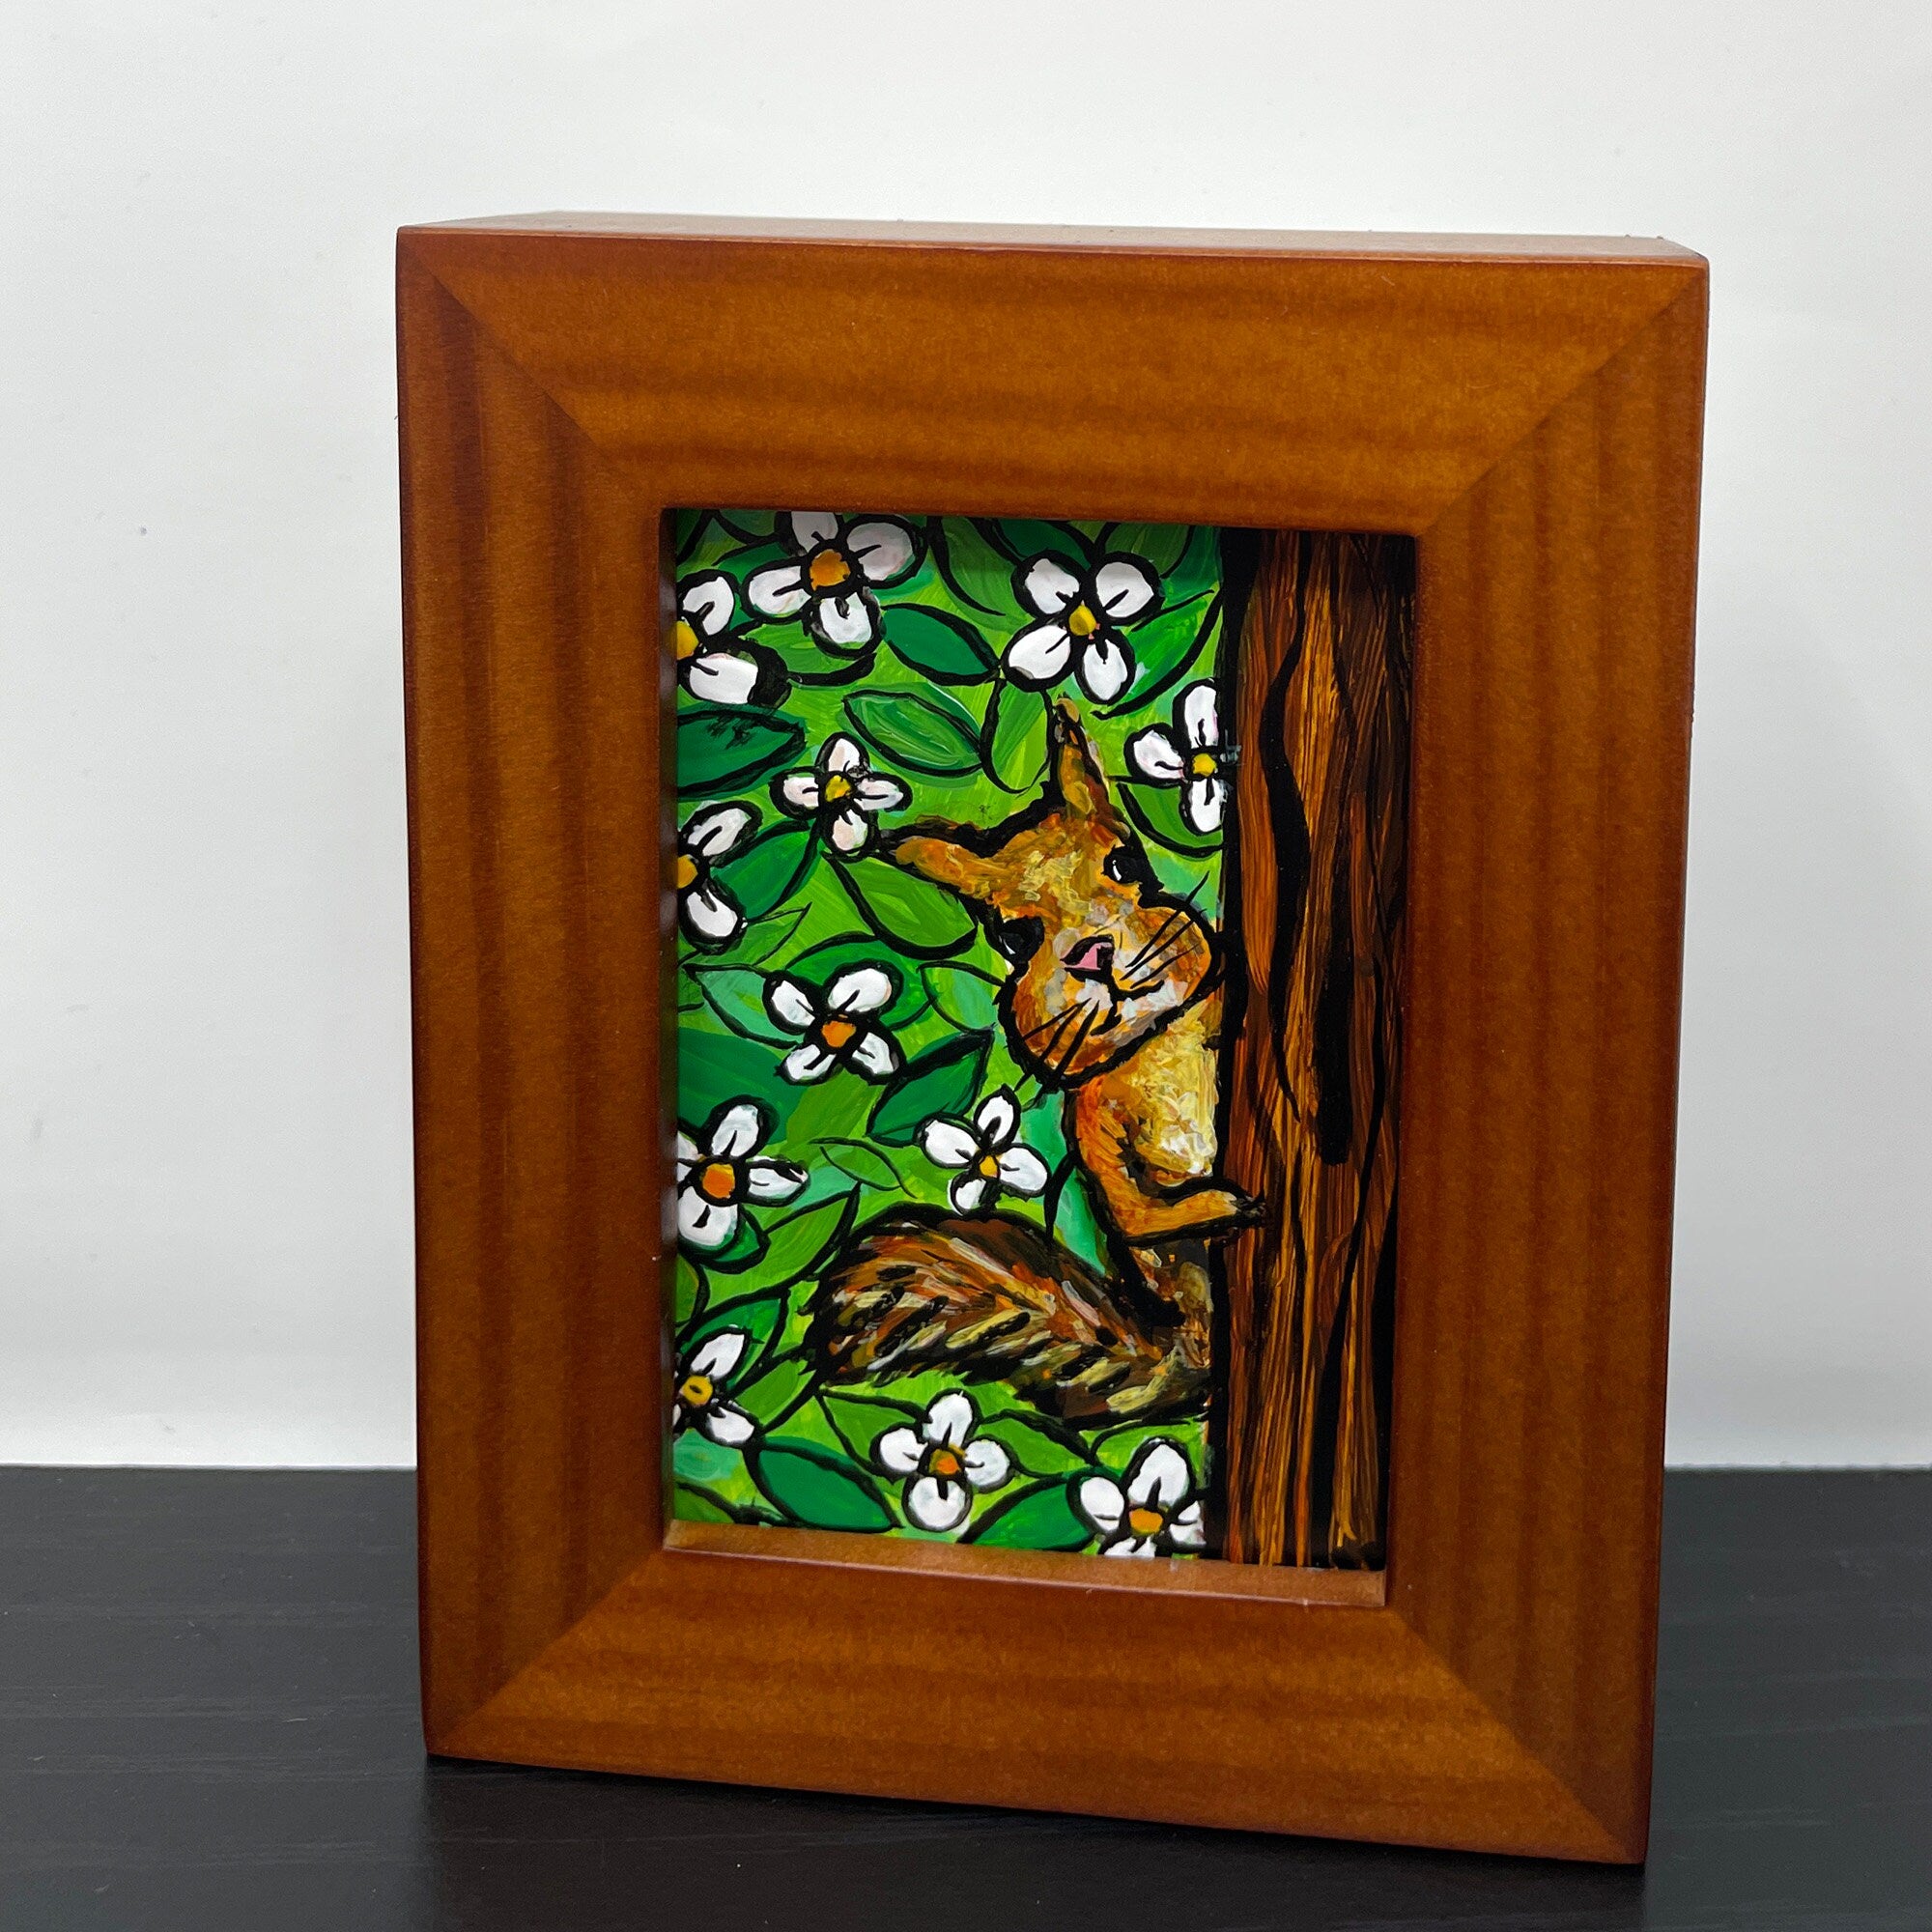 Front view of mini squirrel painting in wood frame on black table. Painting shows squirrel peeking behind a tree at the viewer. Background is white flowers and green leaves.